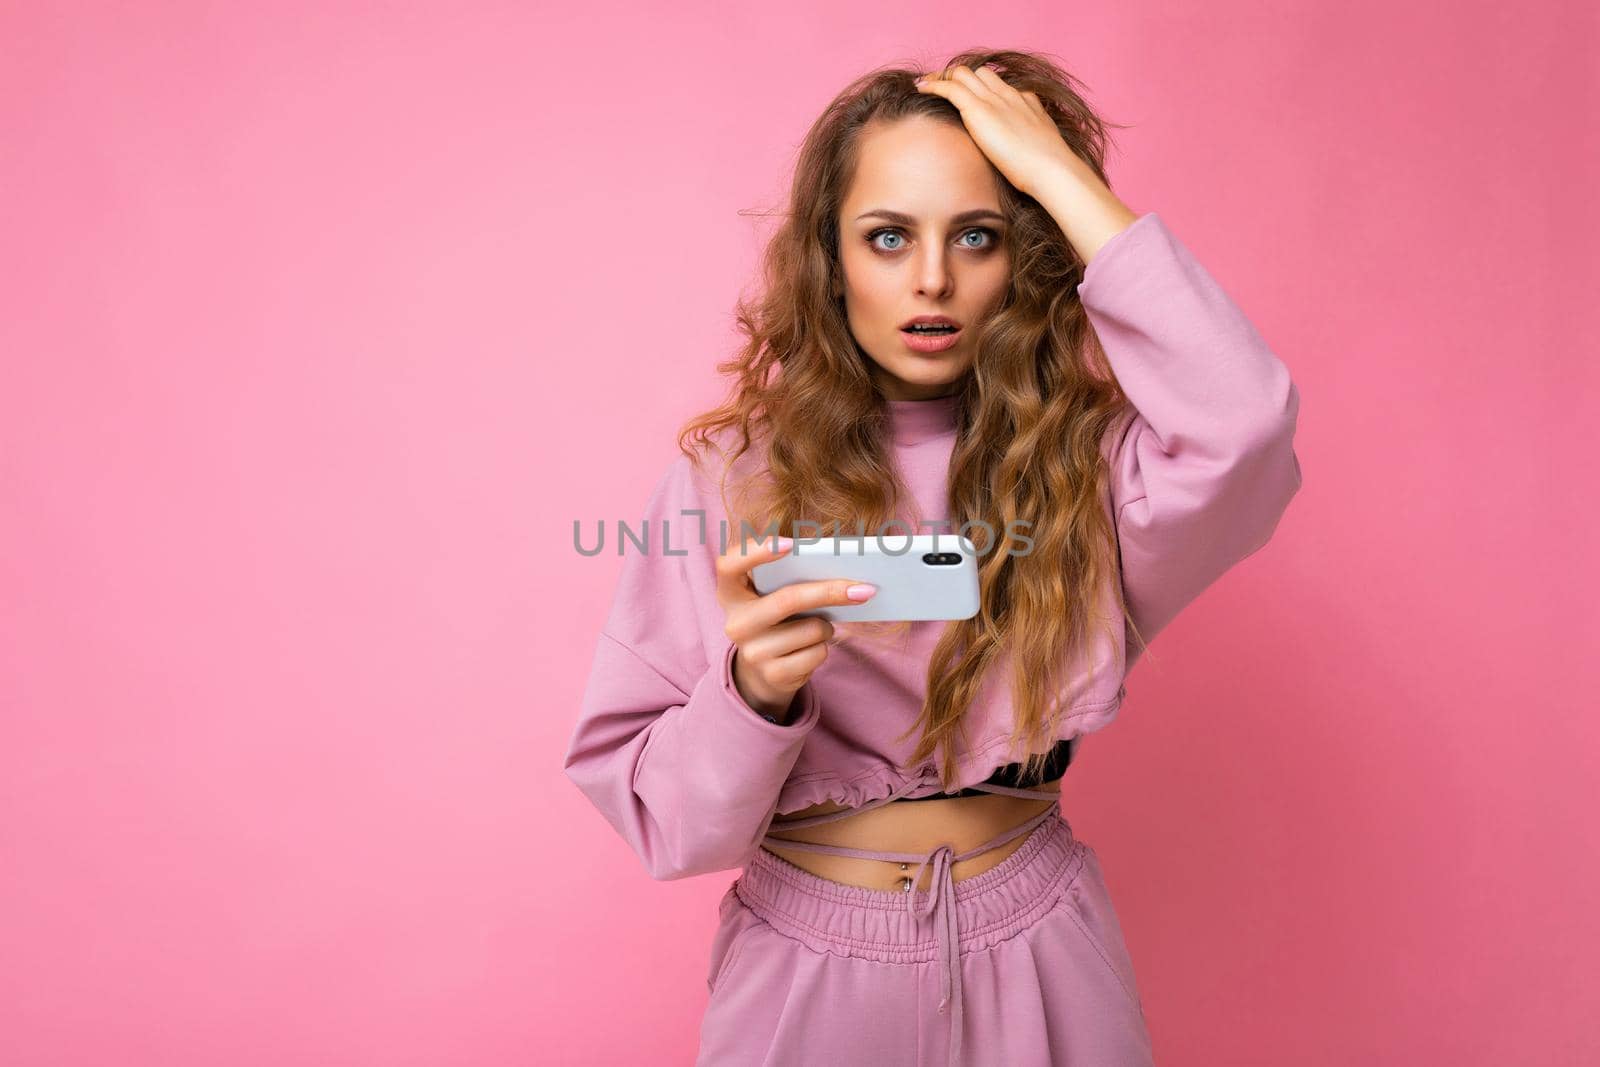 Photo of attractive crazy amazed surprised young woman wearing casual stylish clothes standing isolated over background with copy space holding and using mobile phone looking at camera.